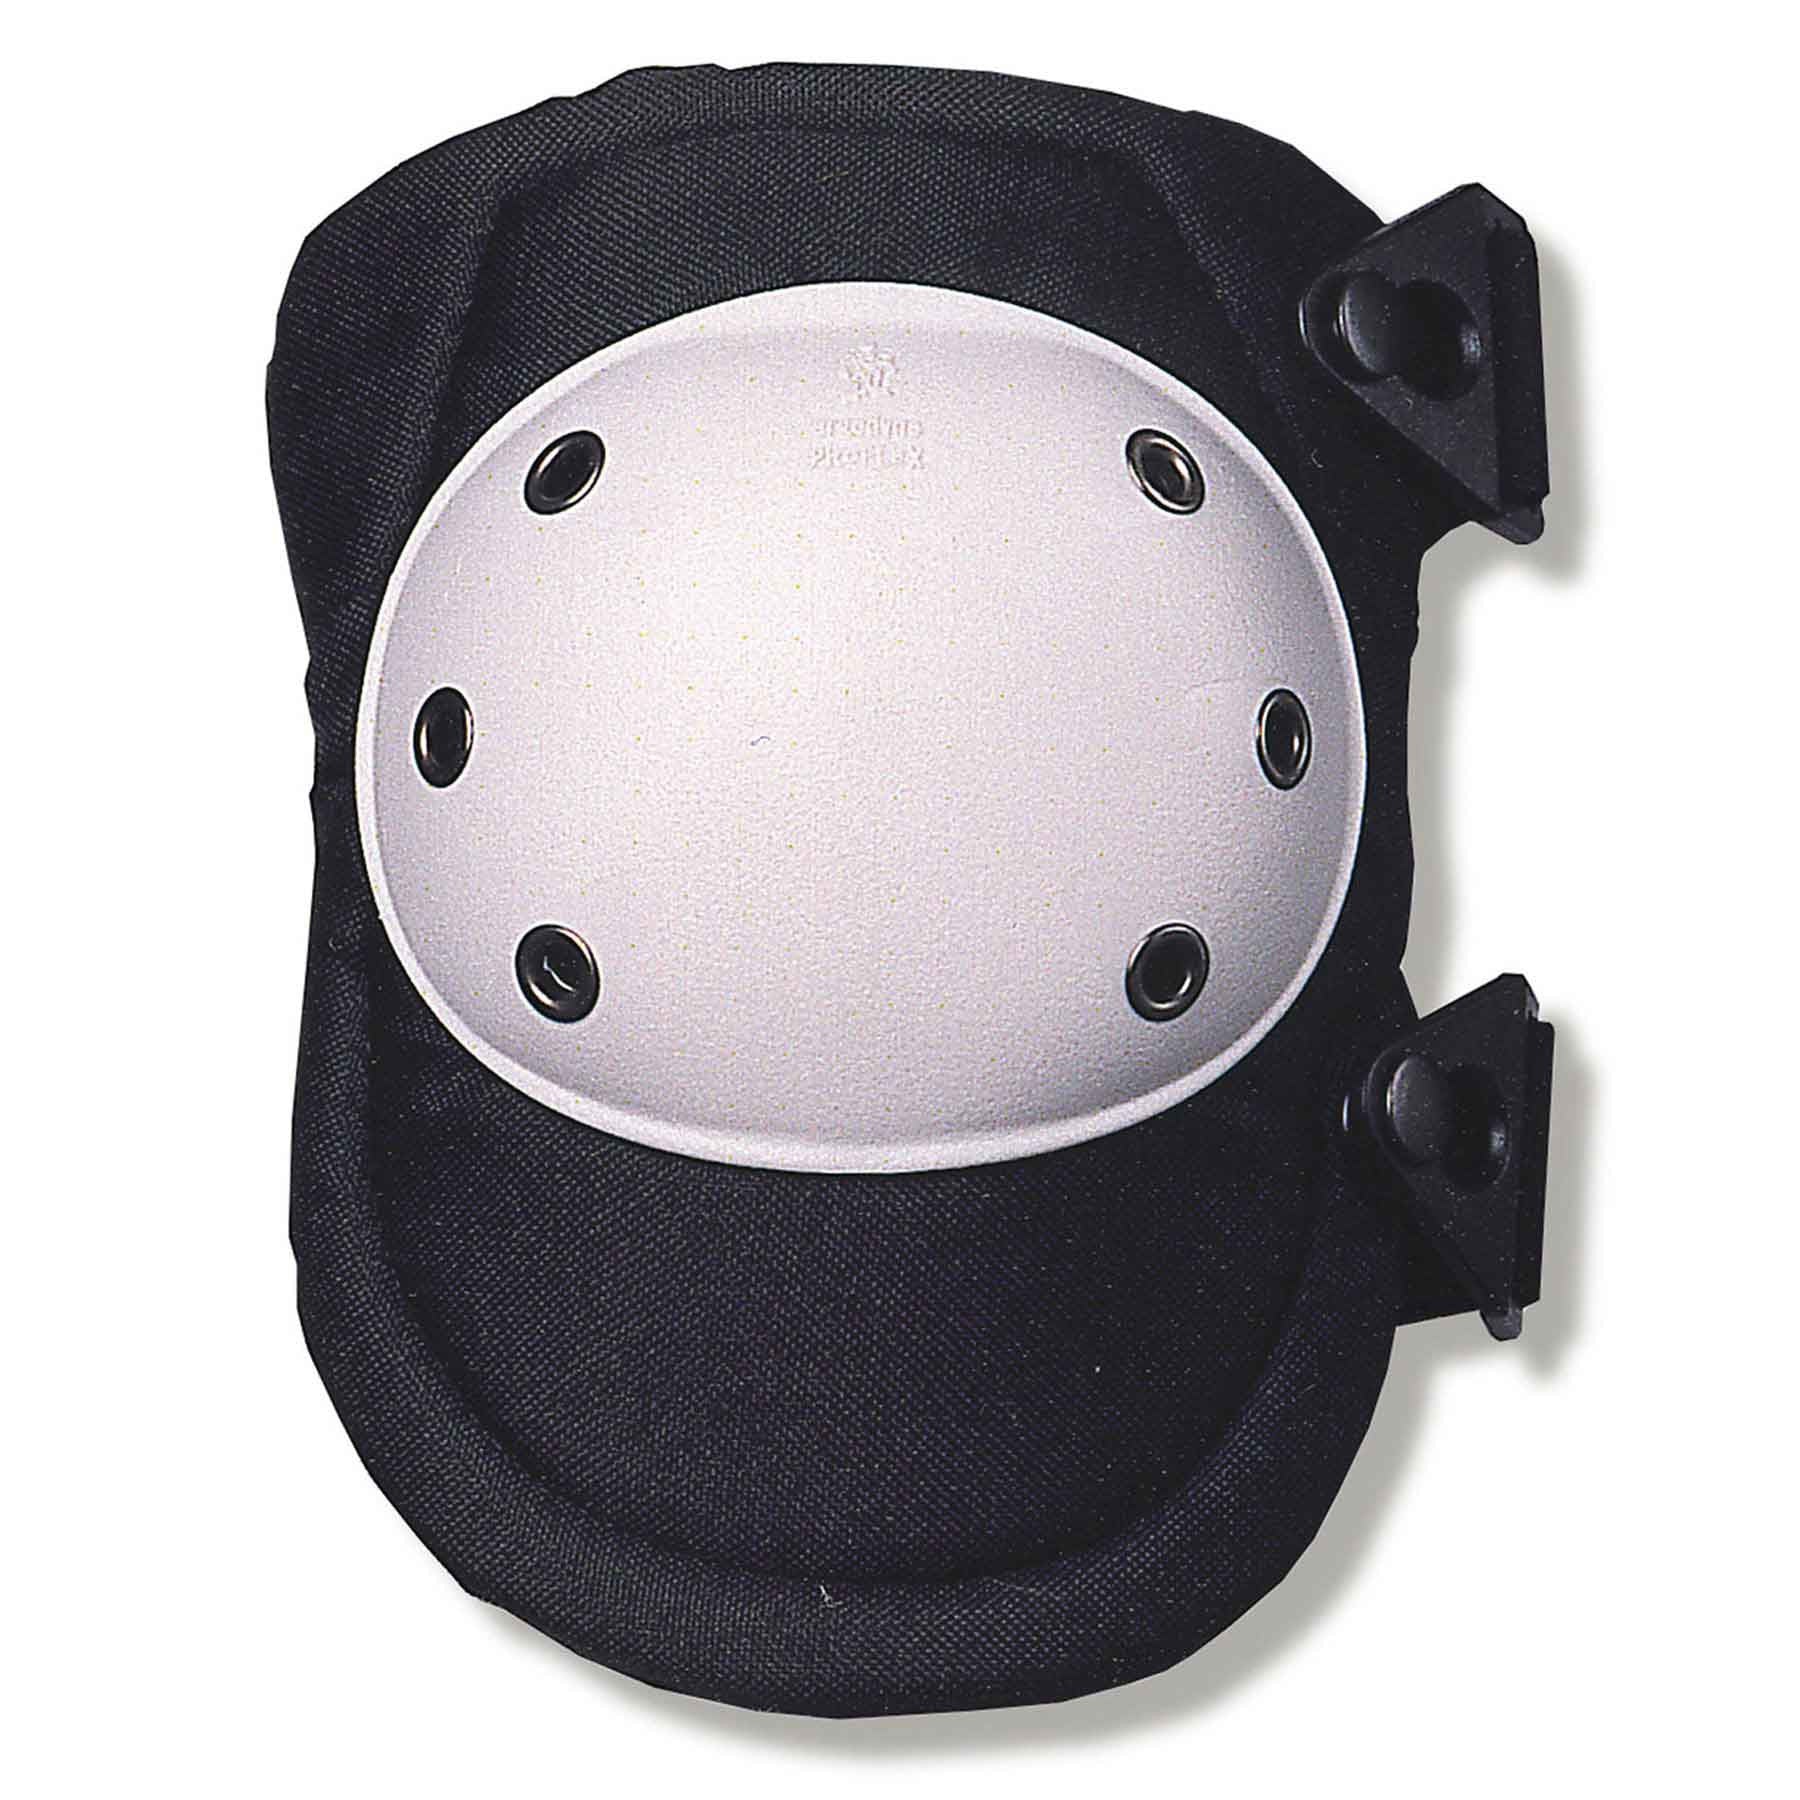 ProFlex 300 Rounded Cap Knee Pad-eSafety Supplies, Inc